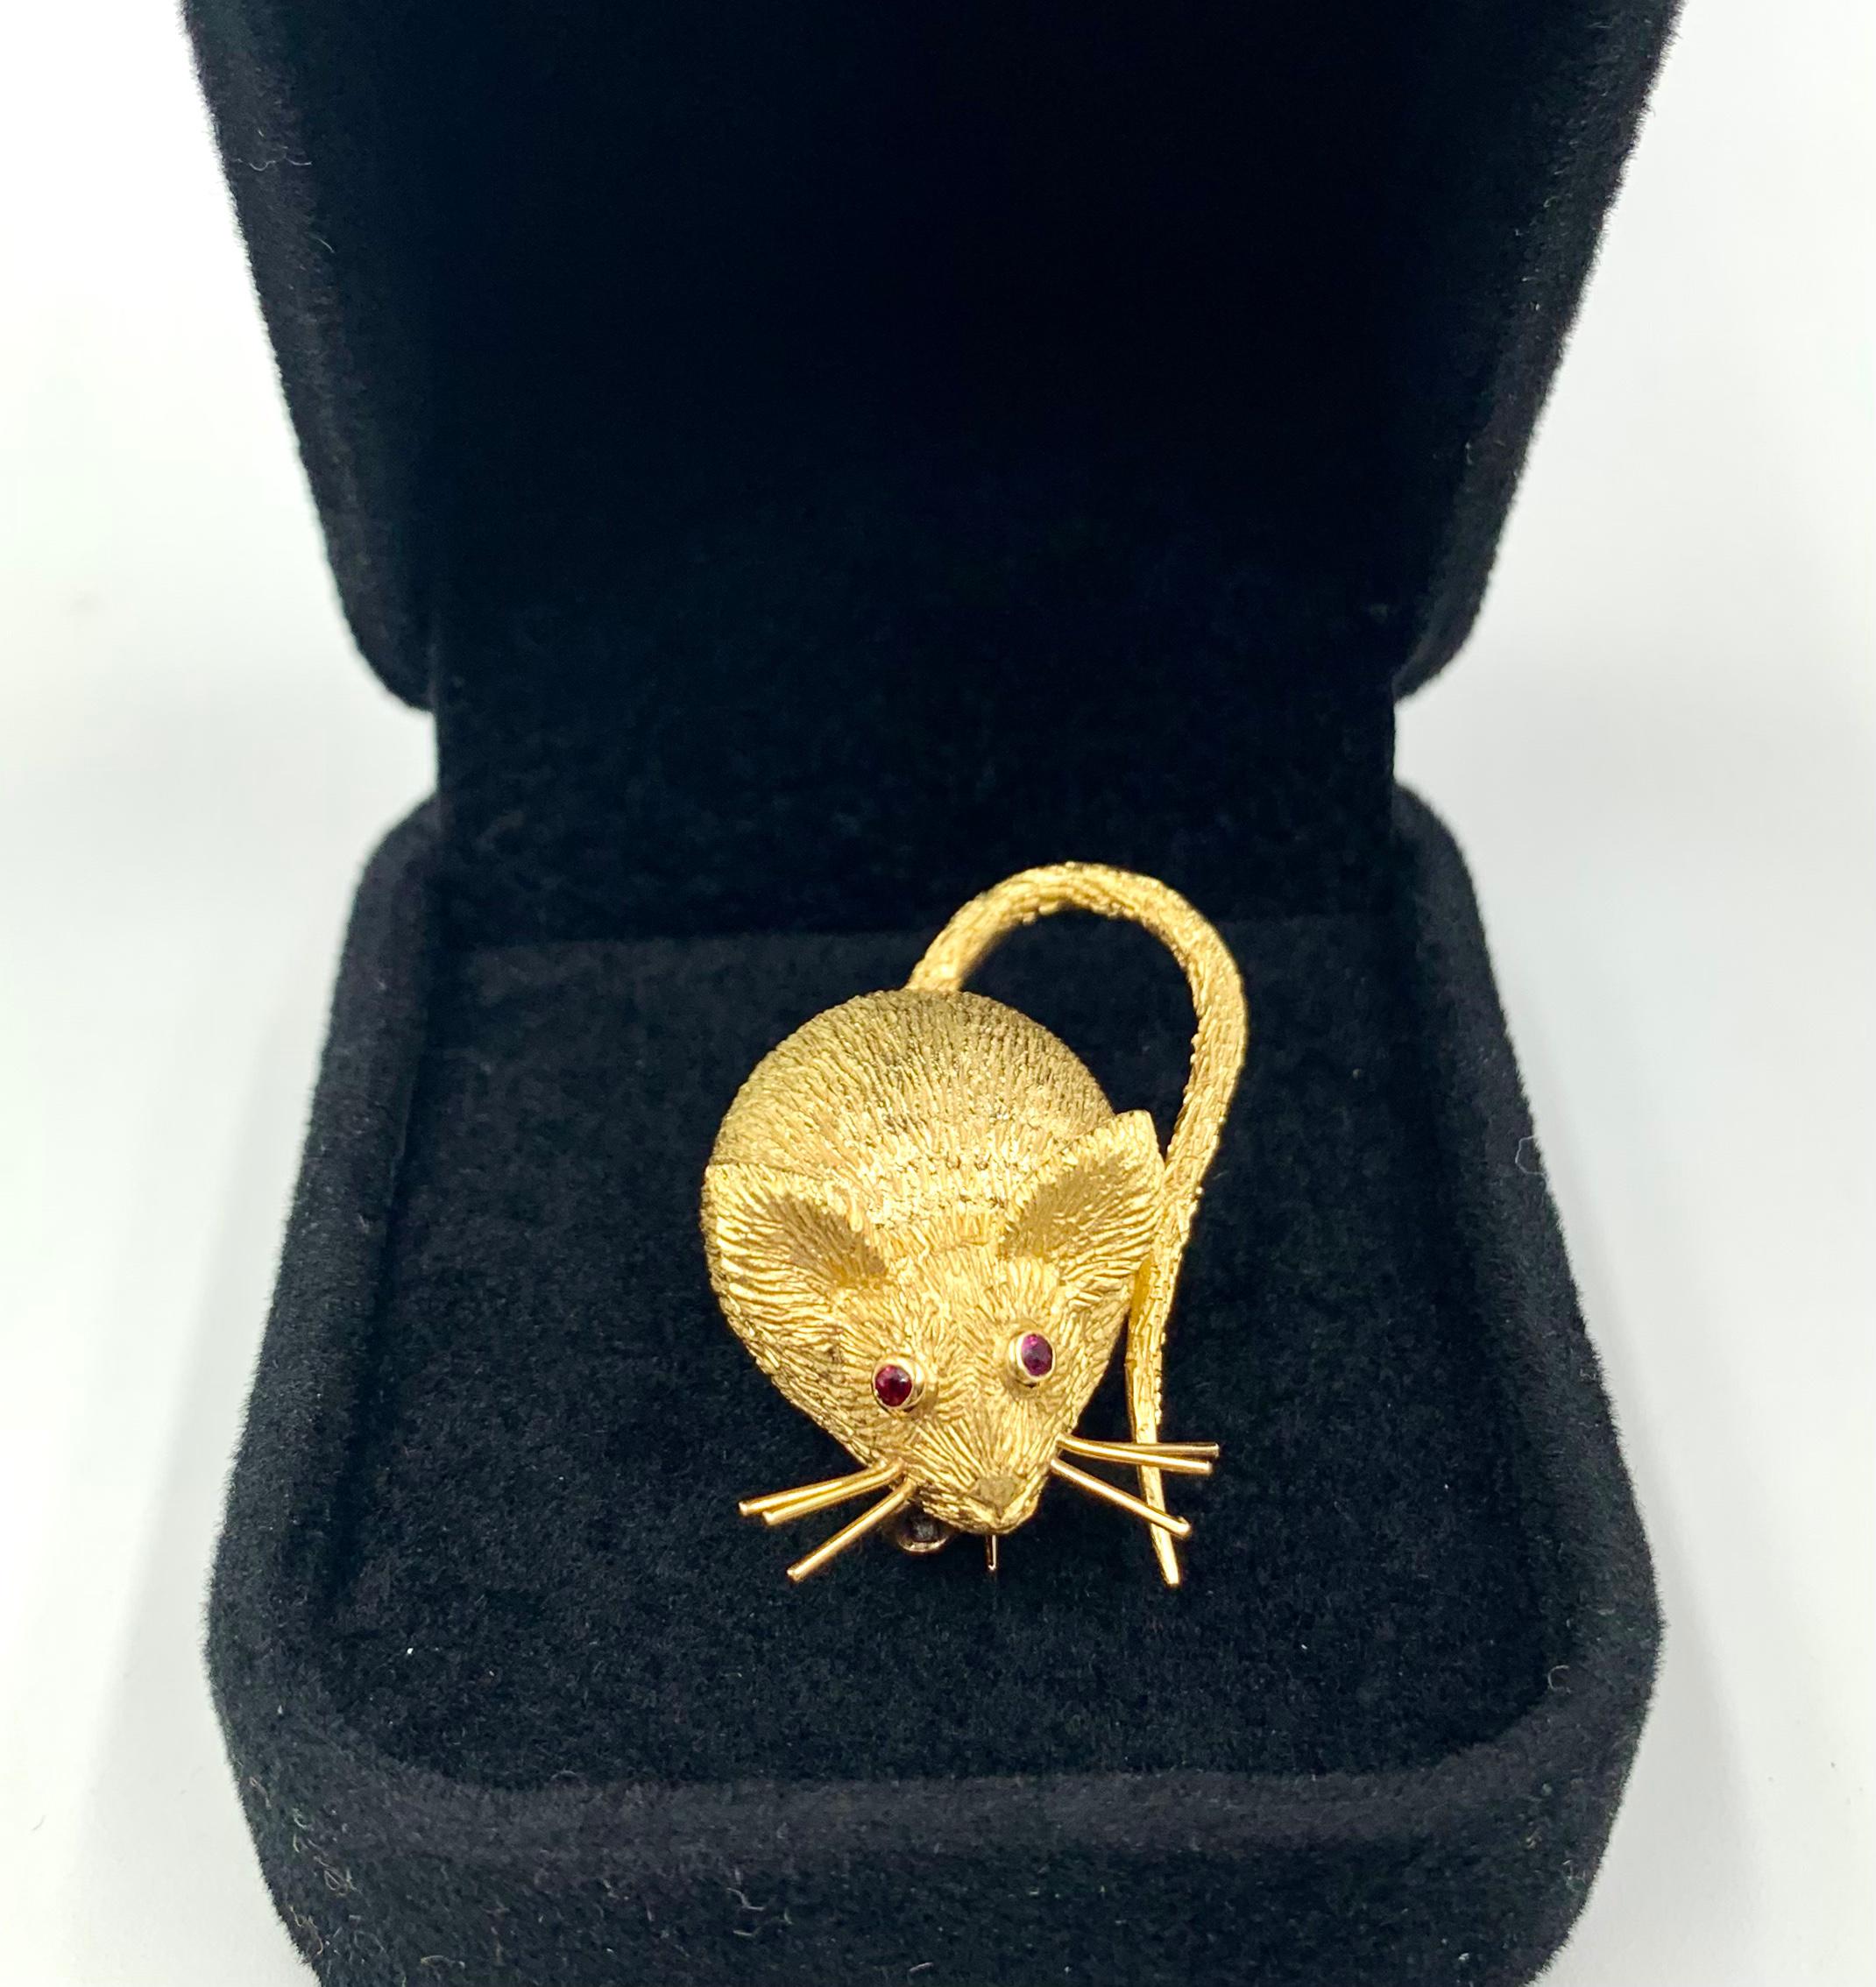 Fabulous vintage Georges L'Enfant 18K yellow gold and ruby mouse/lucky rat clip brooch.
Exquisitely detailed, this delightful mouse has faceted ruby eyes, large adorable ears, beautifully engraved fur, lovely whiskers and a finely curved elegant